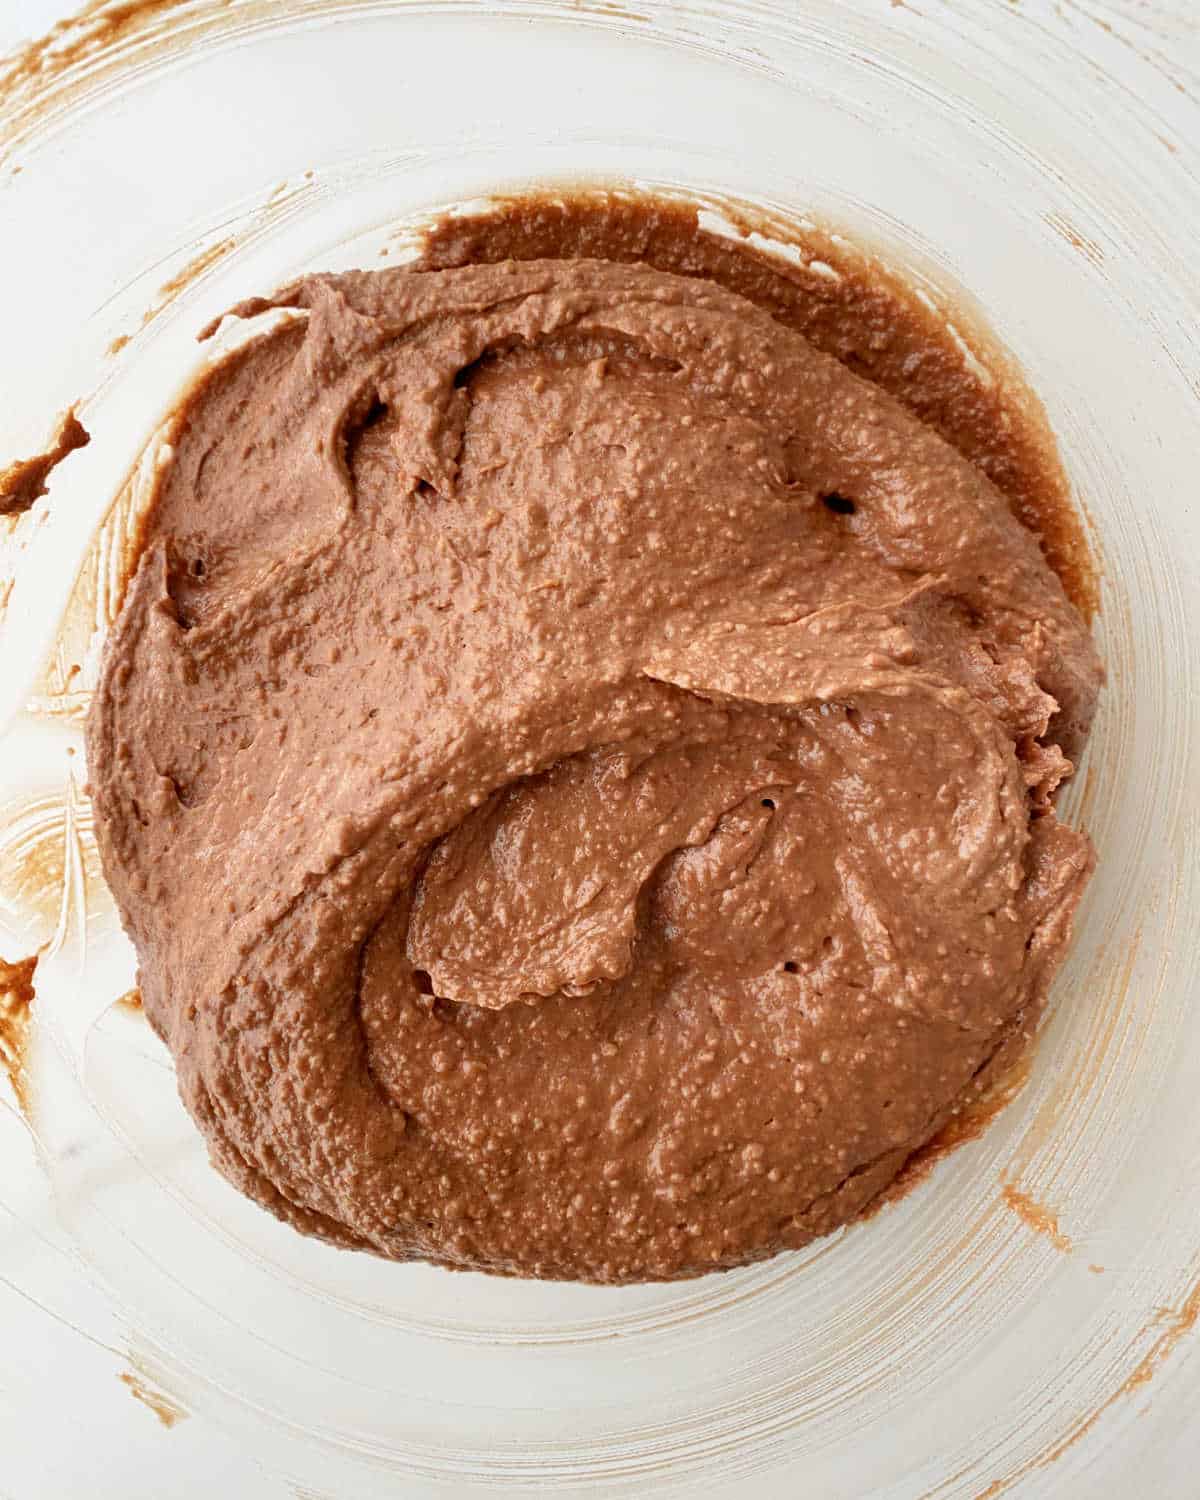 Almond chocolate cake batter in a glass bowl on a white surface. Close up image.